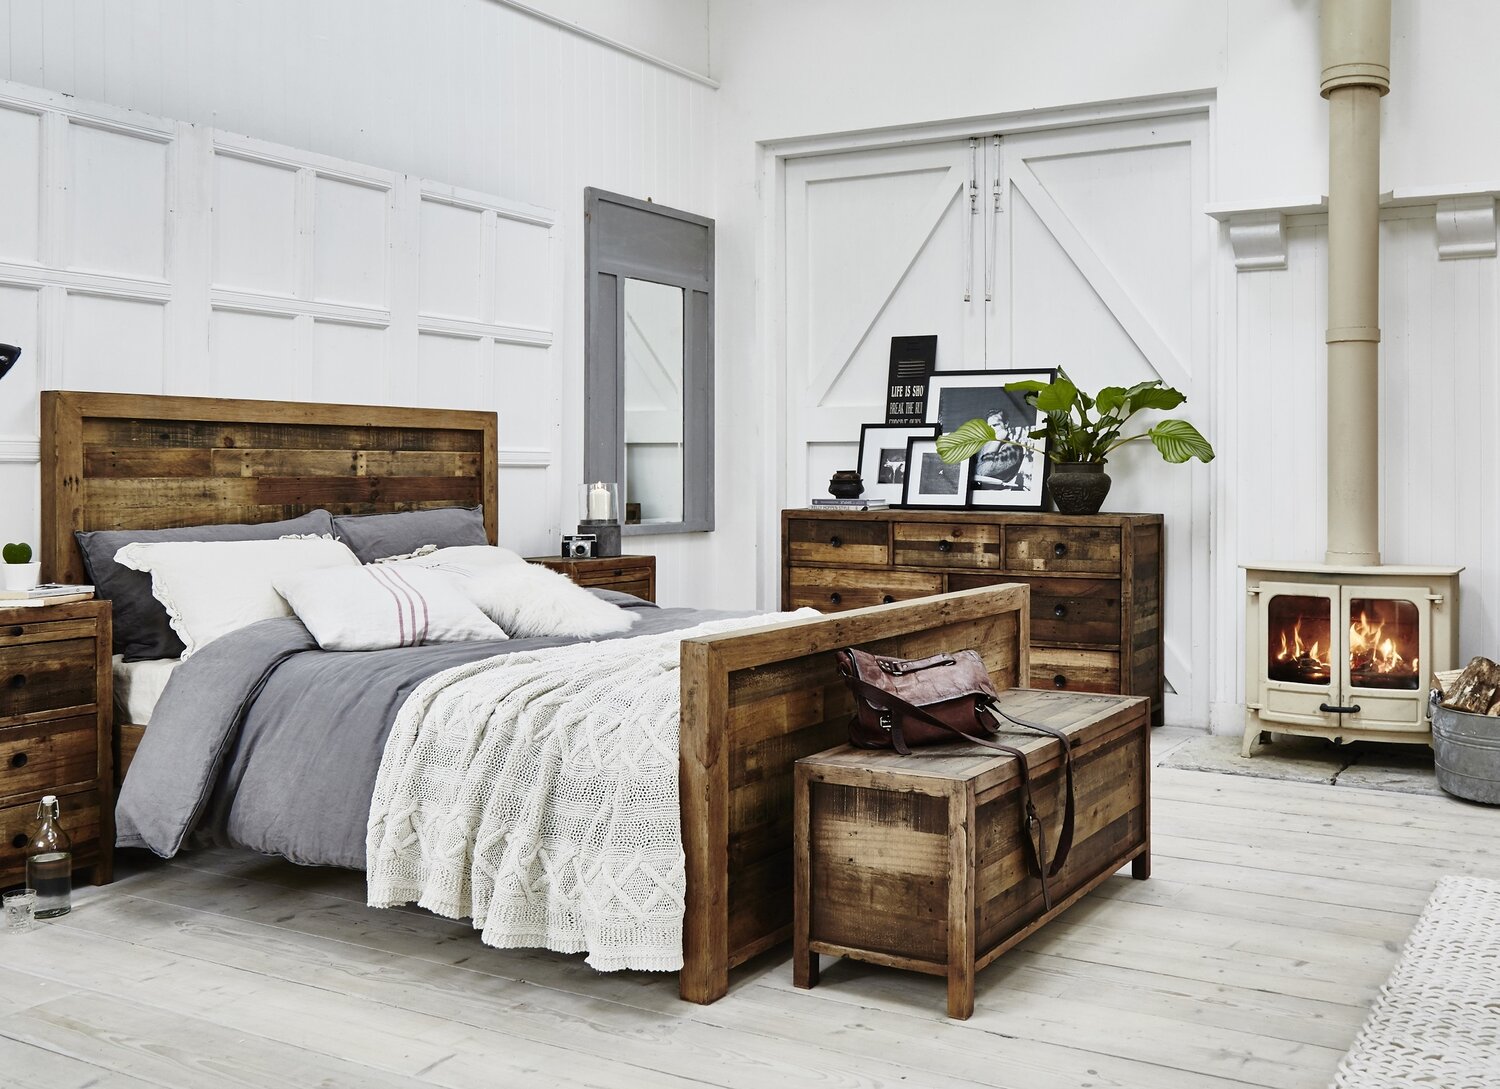 Pairing light and textured bedding and textiles with the Brooklyn furniture will create a rustic and warm feel to your bedroom whilst also making a bold statement from the natural allure of the reclaimed wood boards. The Brooklyn bedstead features a…